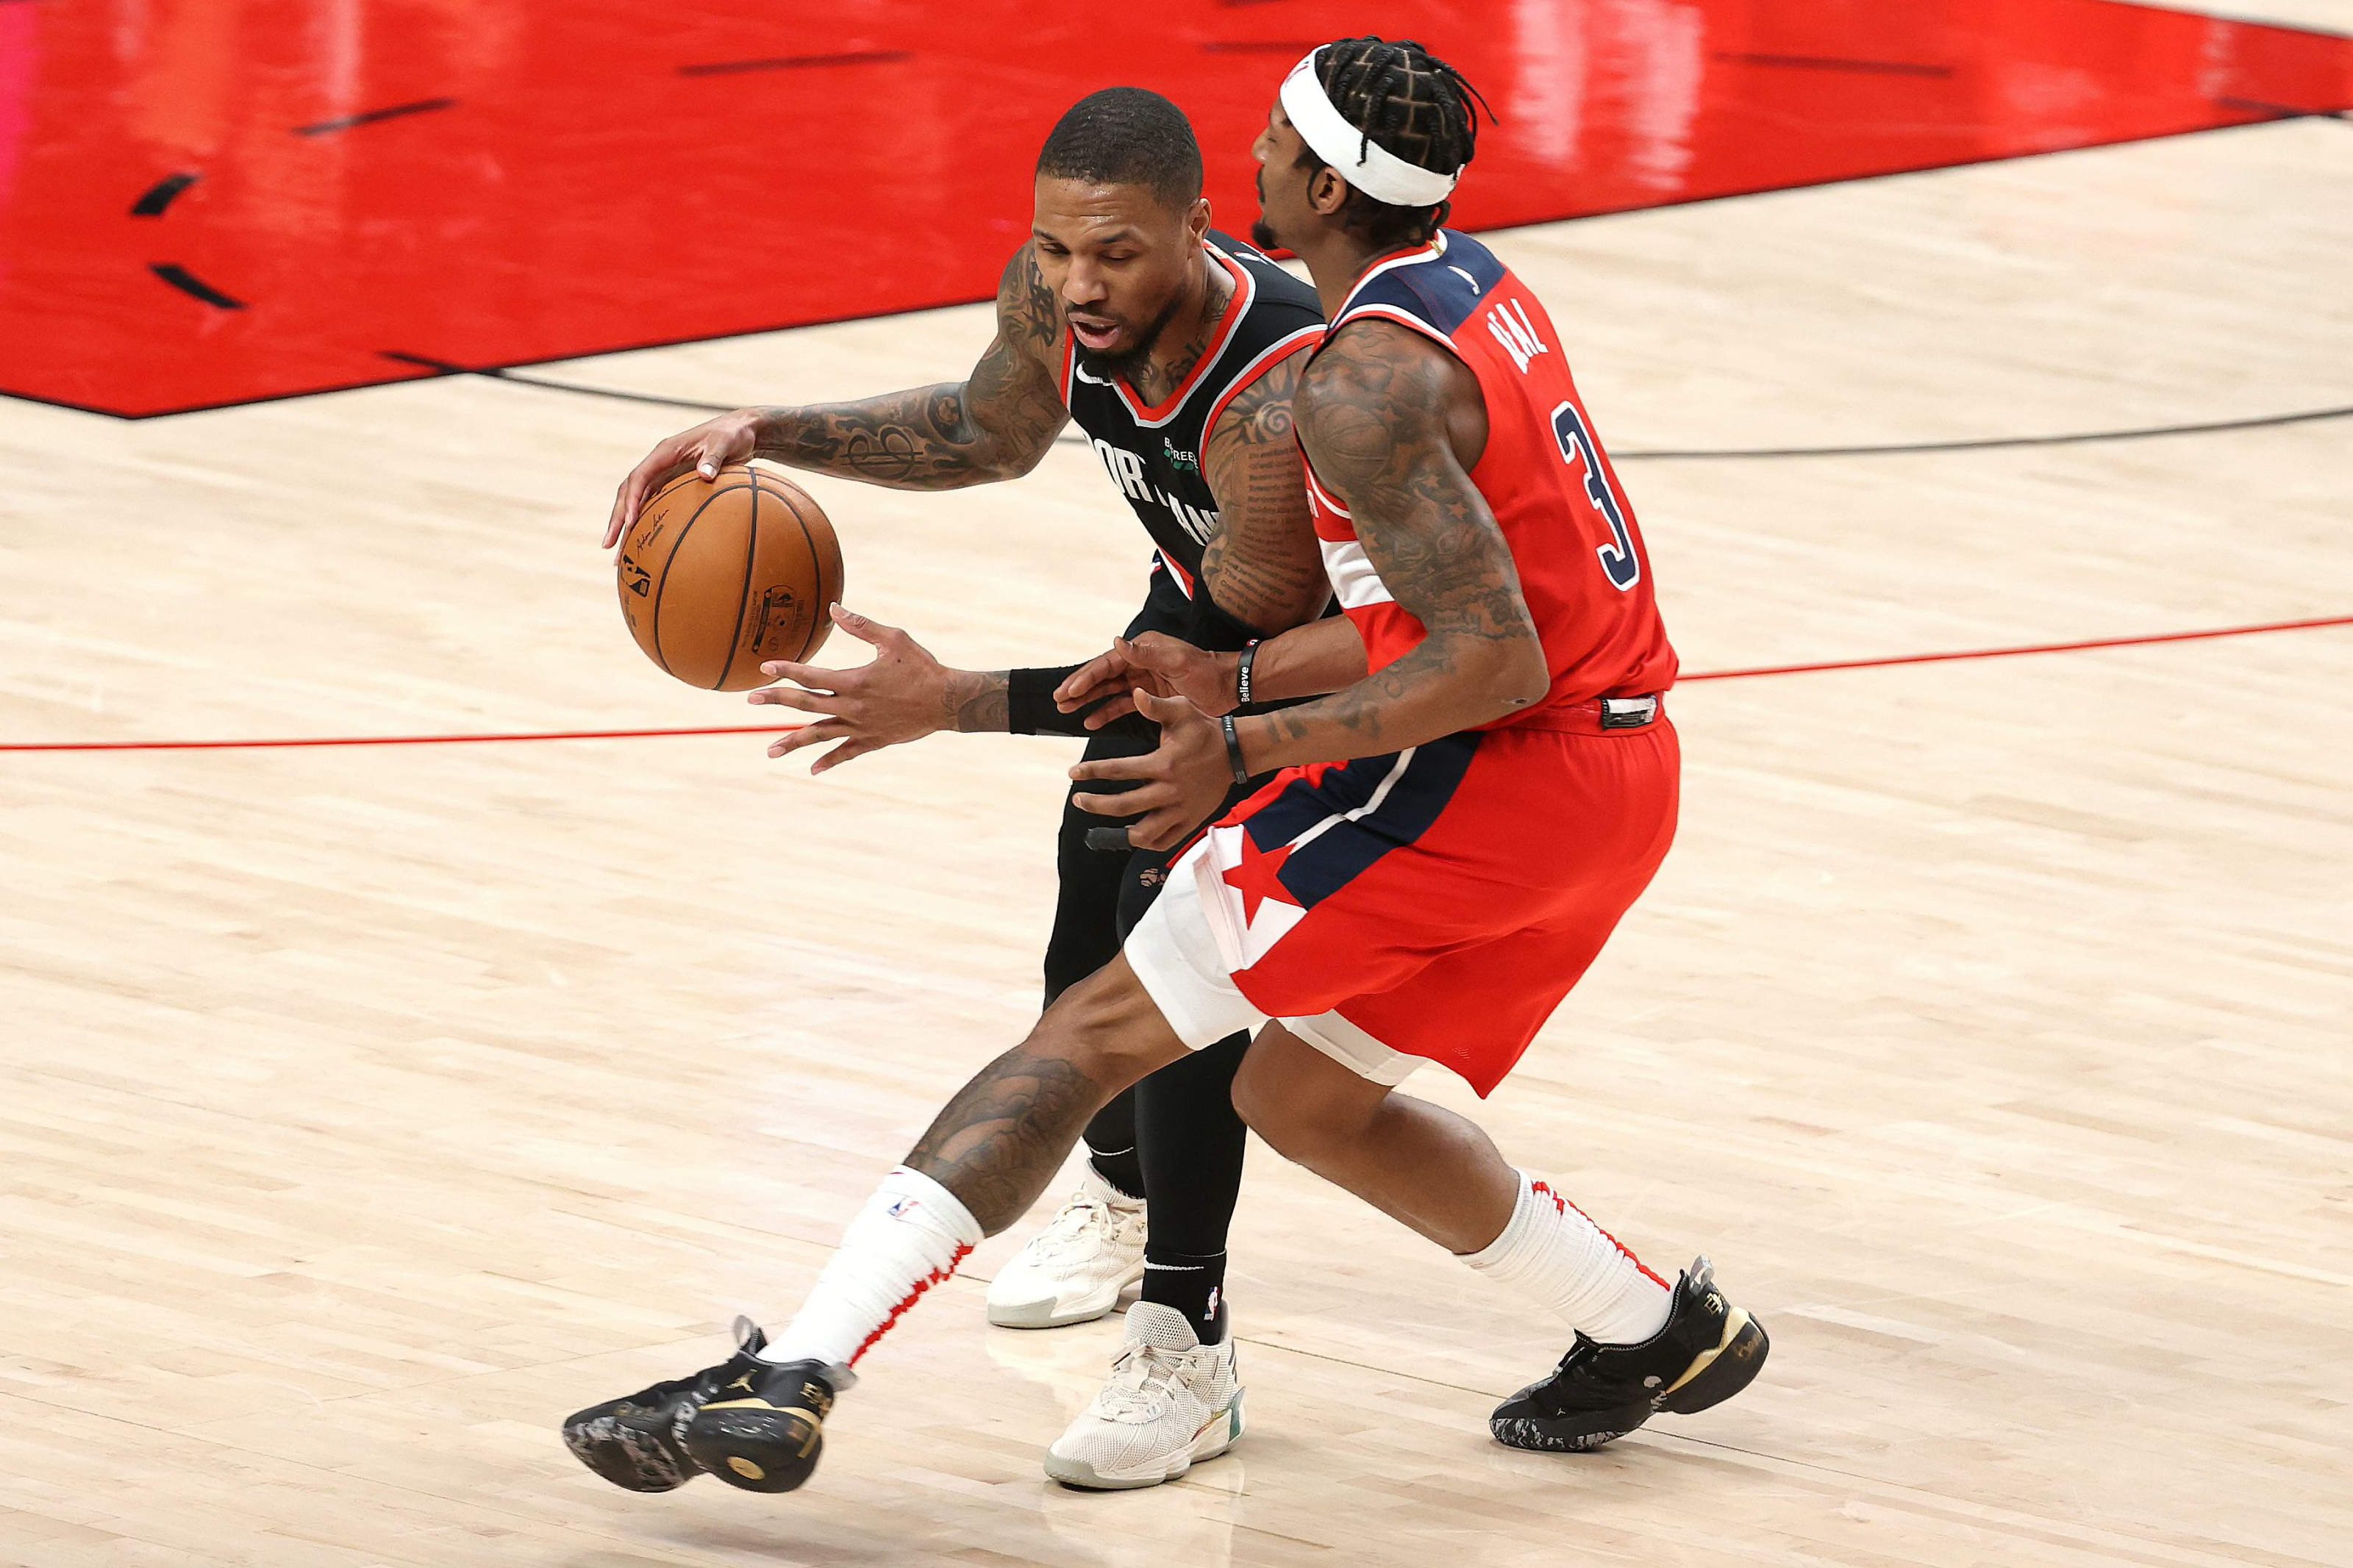 Damian Lillard and Bradley Beal could join exclusive group of NBA players